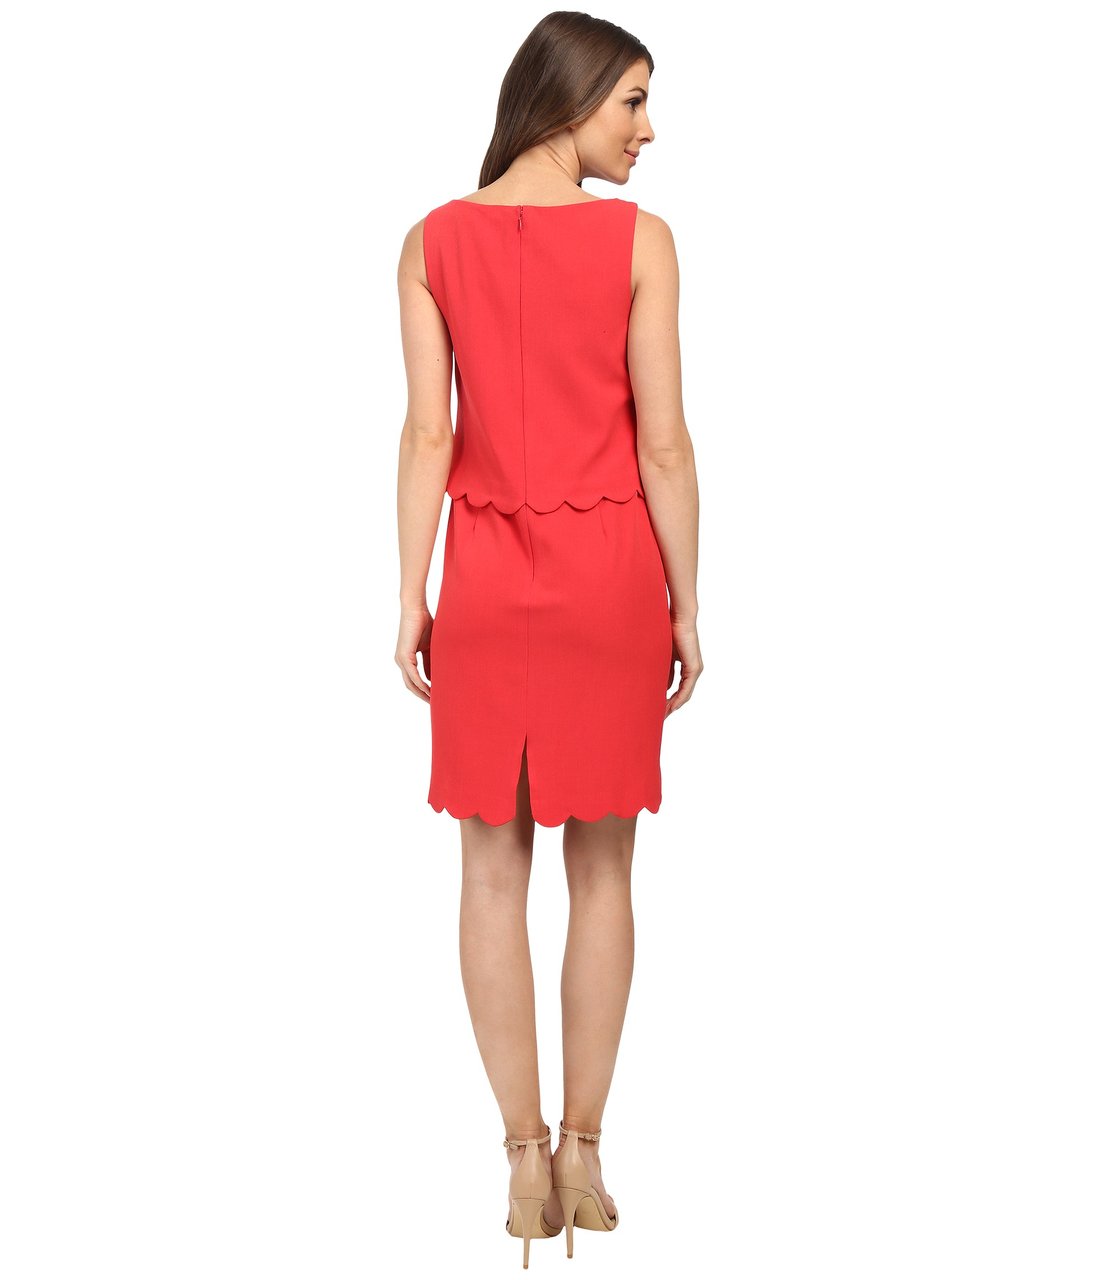 Adrianna Papell - Popover Sleeveless Sheath Dress 12242070 in Red